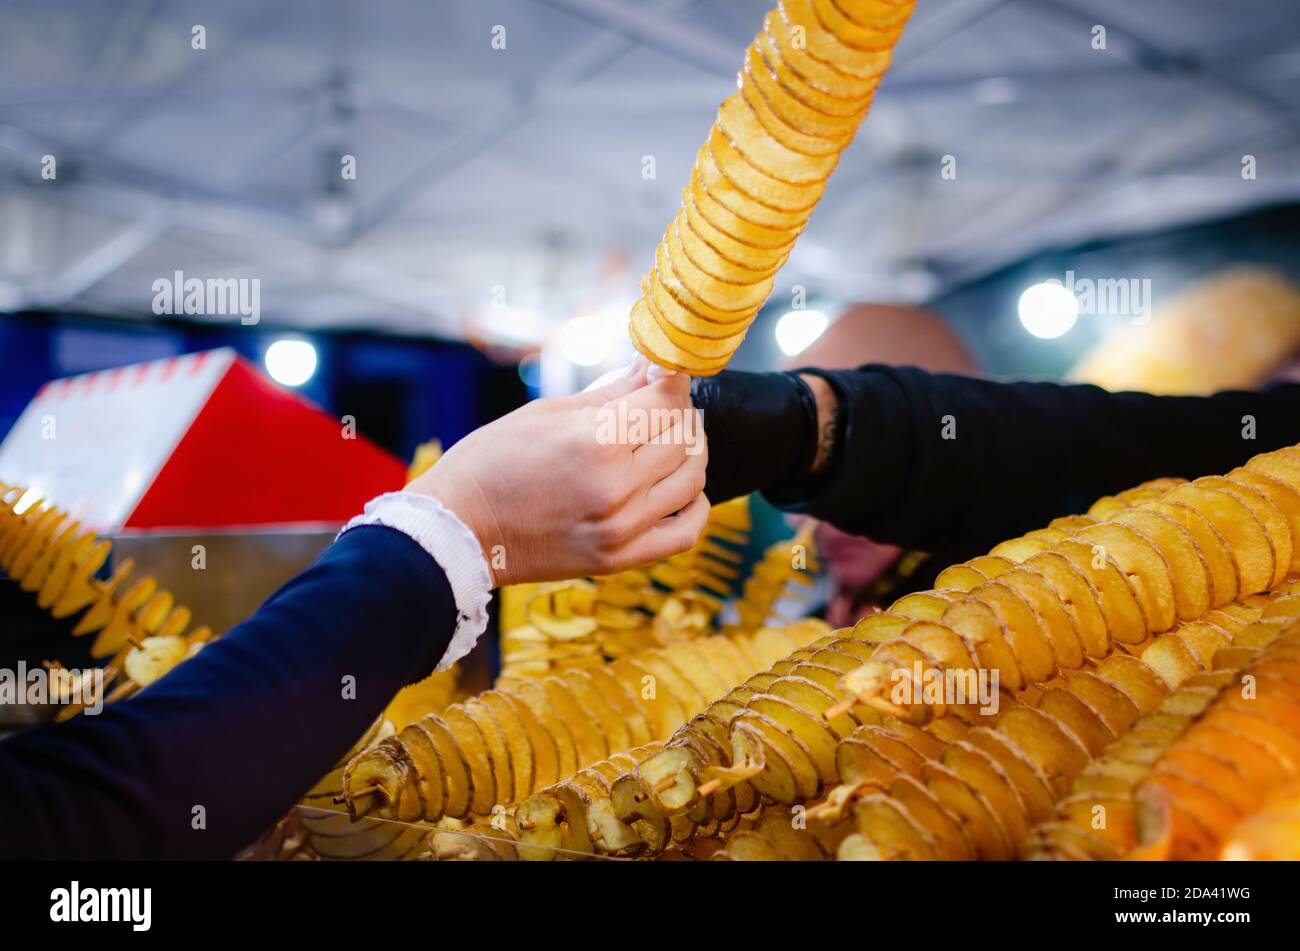 female hand taking a spiral twisted tornado potato from the seller of a street food market stall at evening Stock Photo